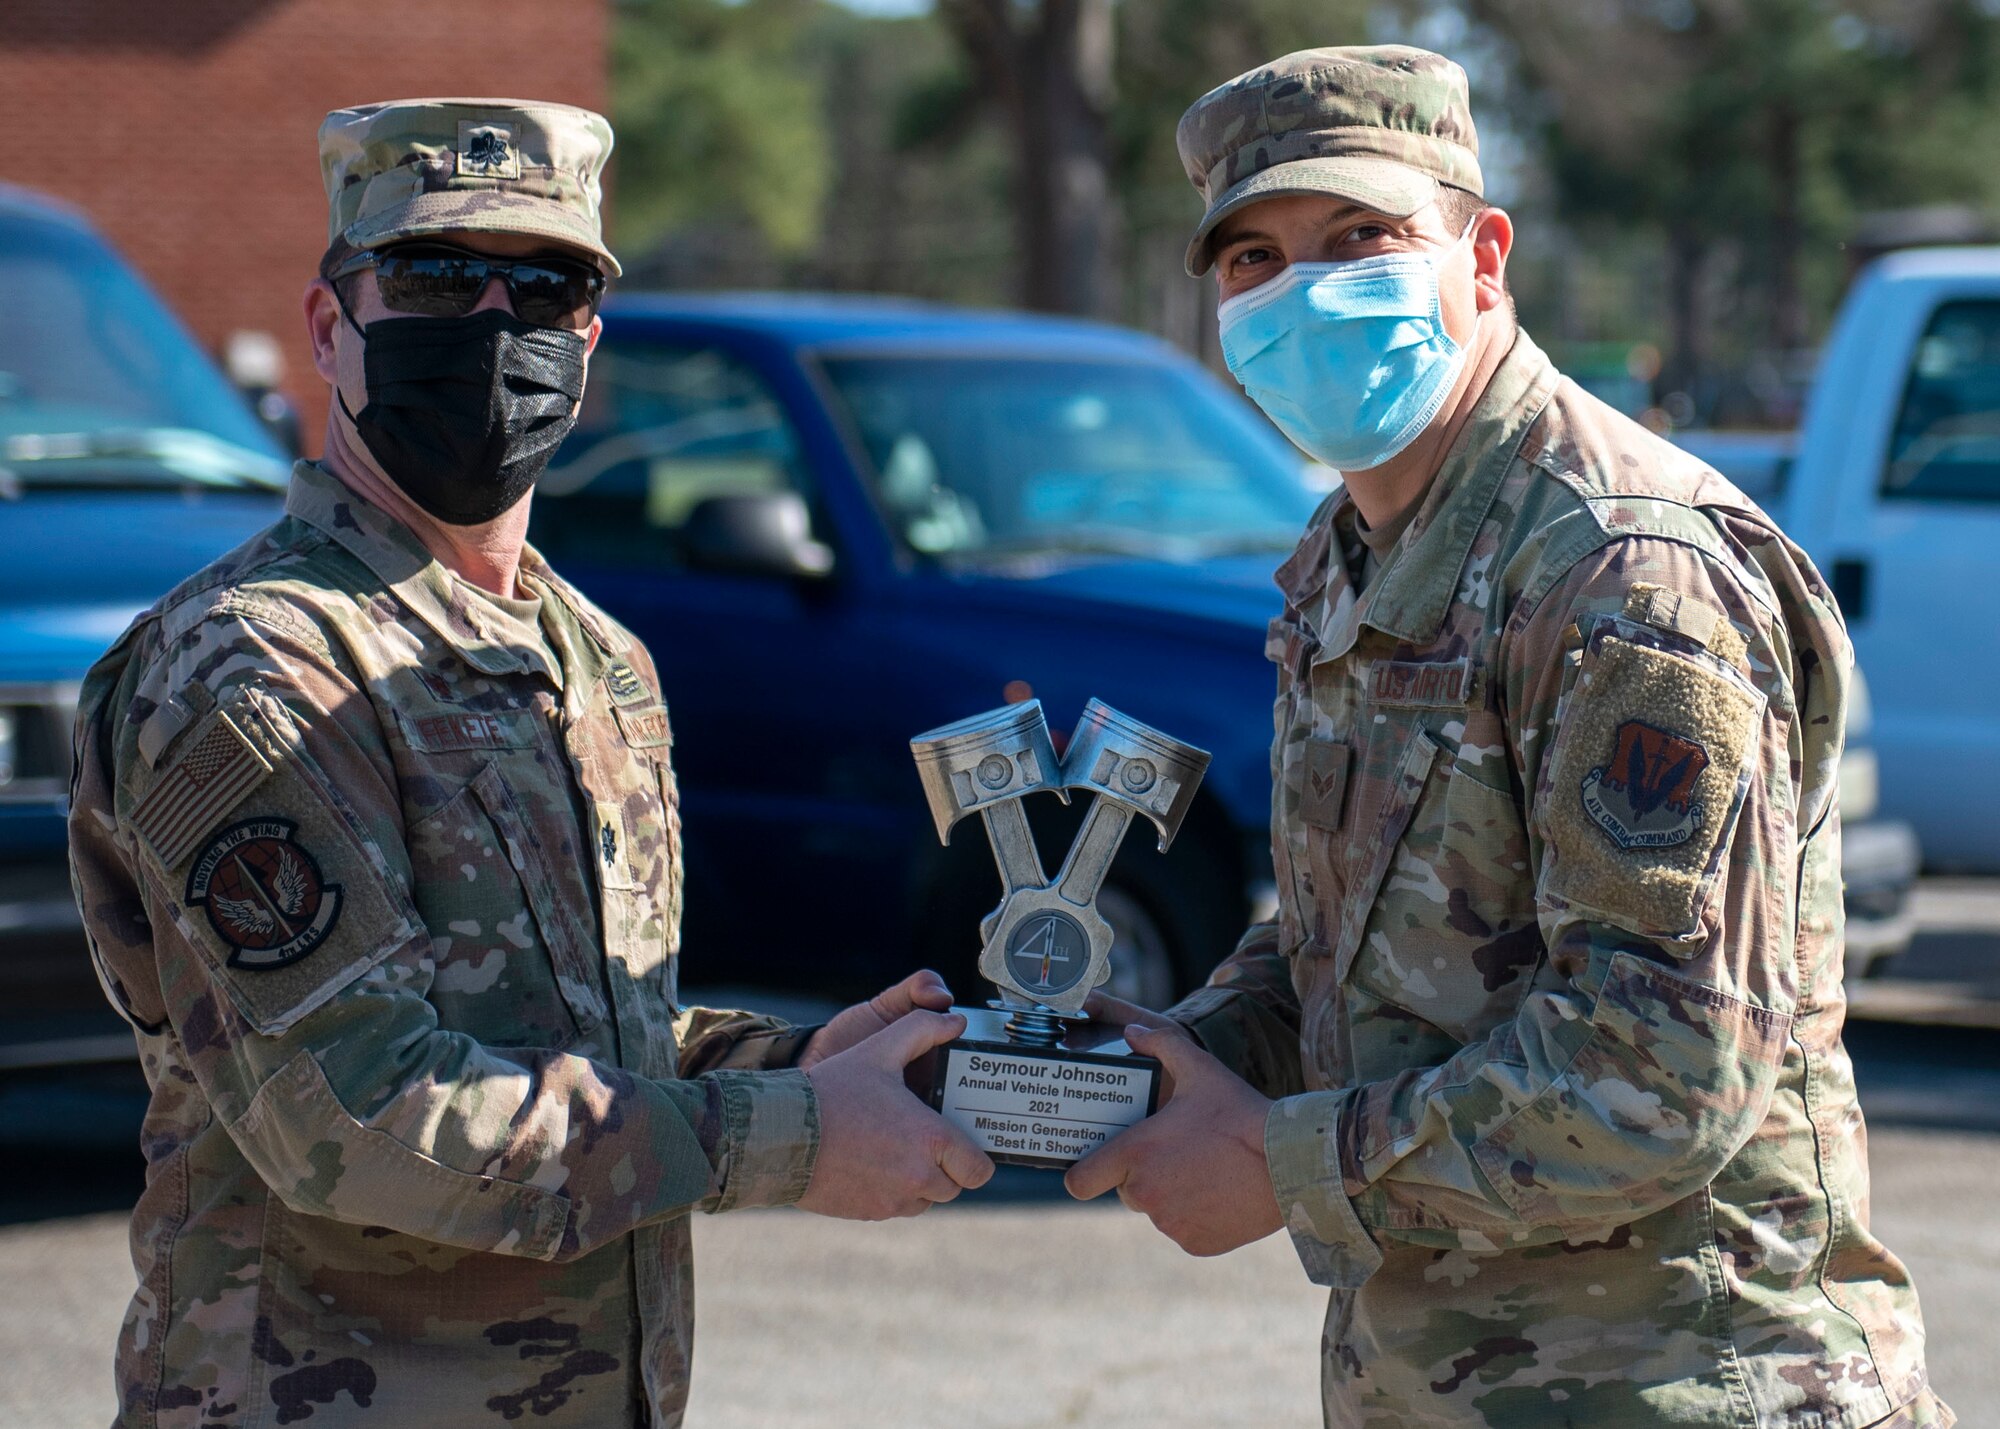 Lt. Col. Robert Fekete, left, 4th Logistics Readiness Squadron commander, presents Senior Airman Aaron Smith, right, 4th Civil Engineer Squadron pavement and equipment technician, with a trophy during a Vehicle Inspection Roll-By competition at Seymour Johnson Air Force Base, North Carolina, March 8, 2021.